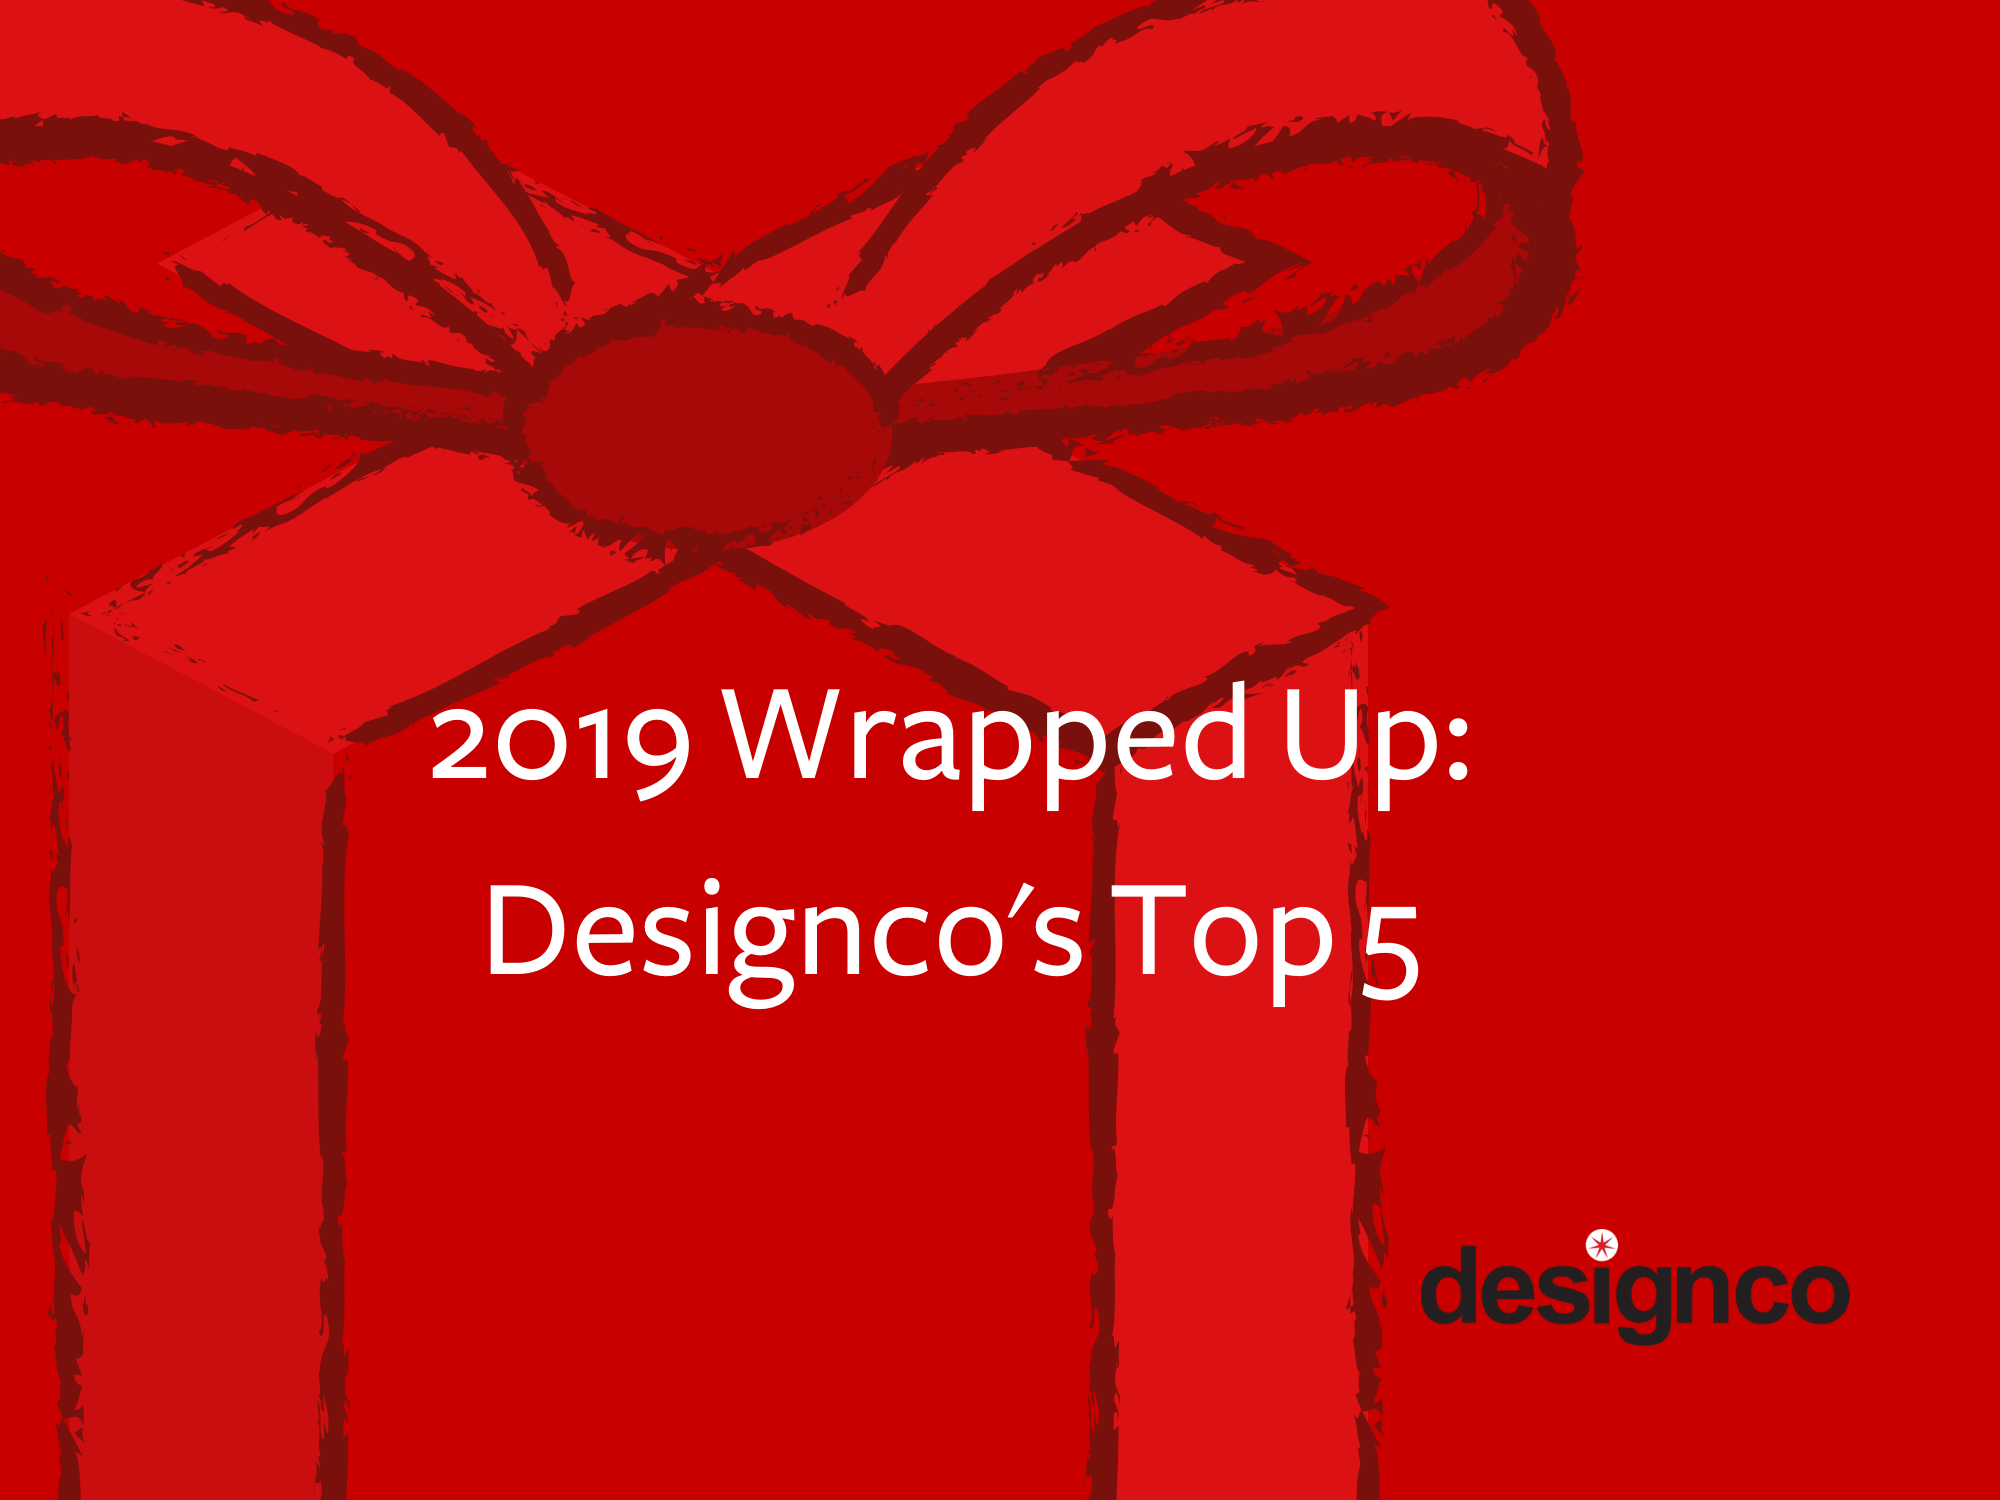 2019 Wrapped Up: Designco's Top 5